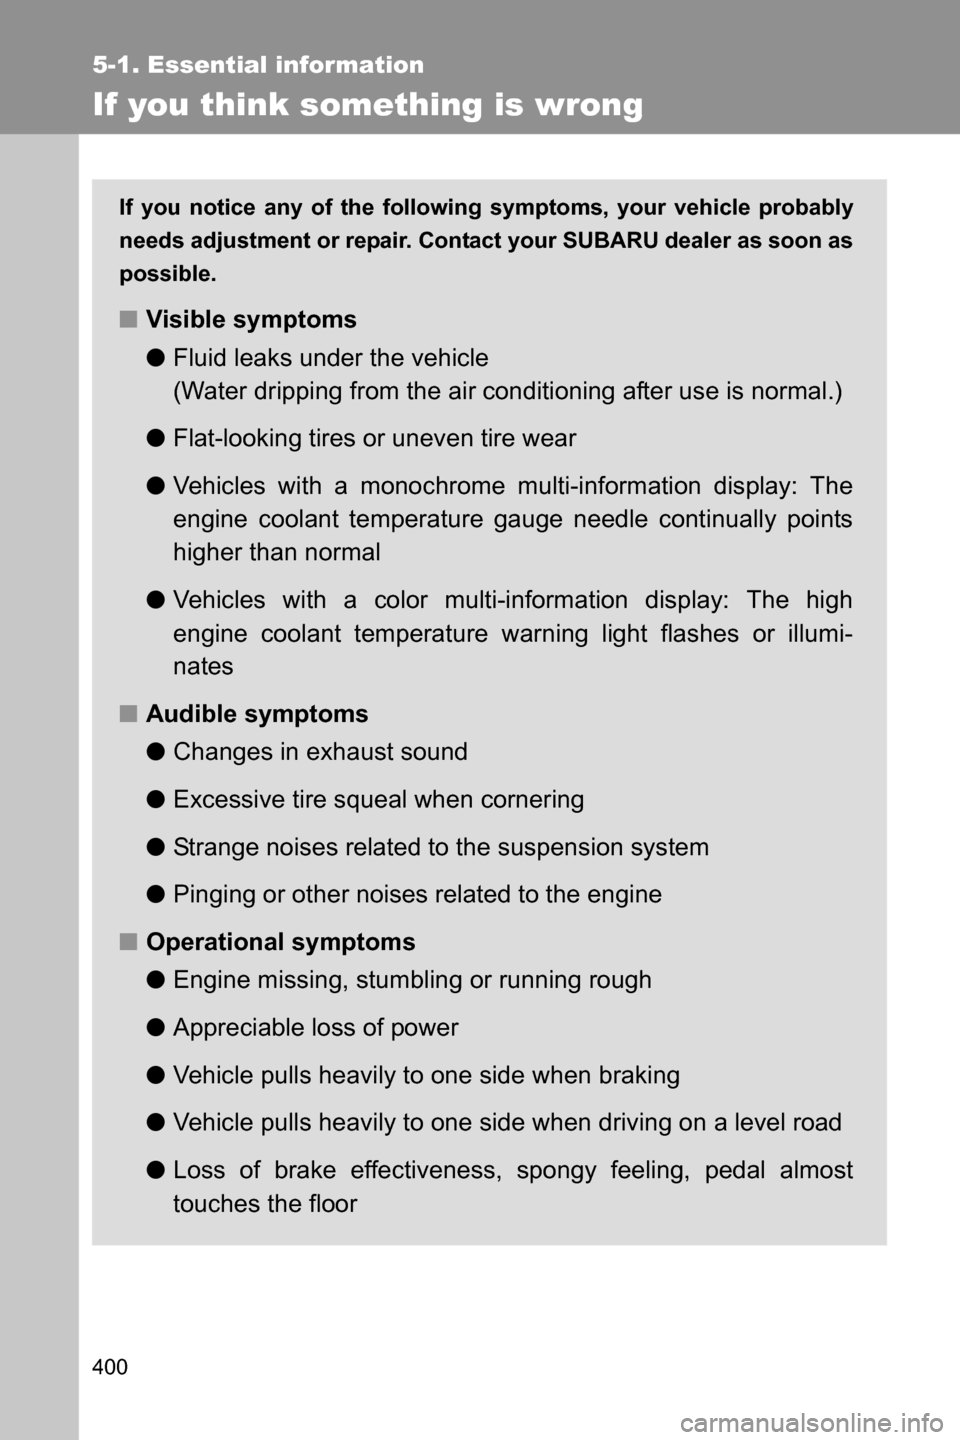 SUBARU BRZ 2017 1.G Owners Manual 400
5-1. Essential information
If you think something is wrong
If you notice any of the following symptoms, your vehicle probably
needs adjustment or repair. Contact your SUBARU dealer as soon as
poss